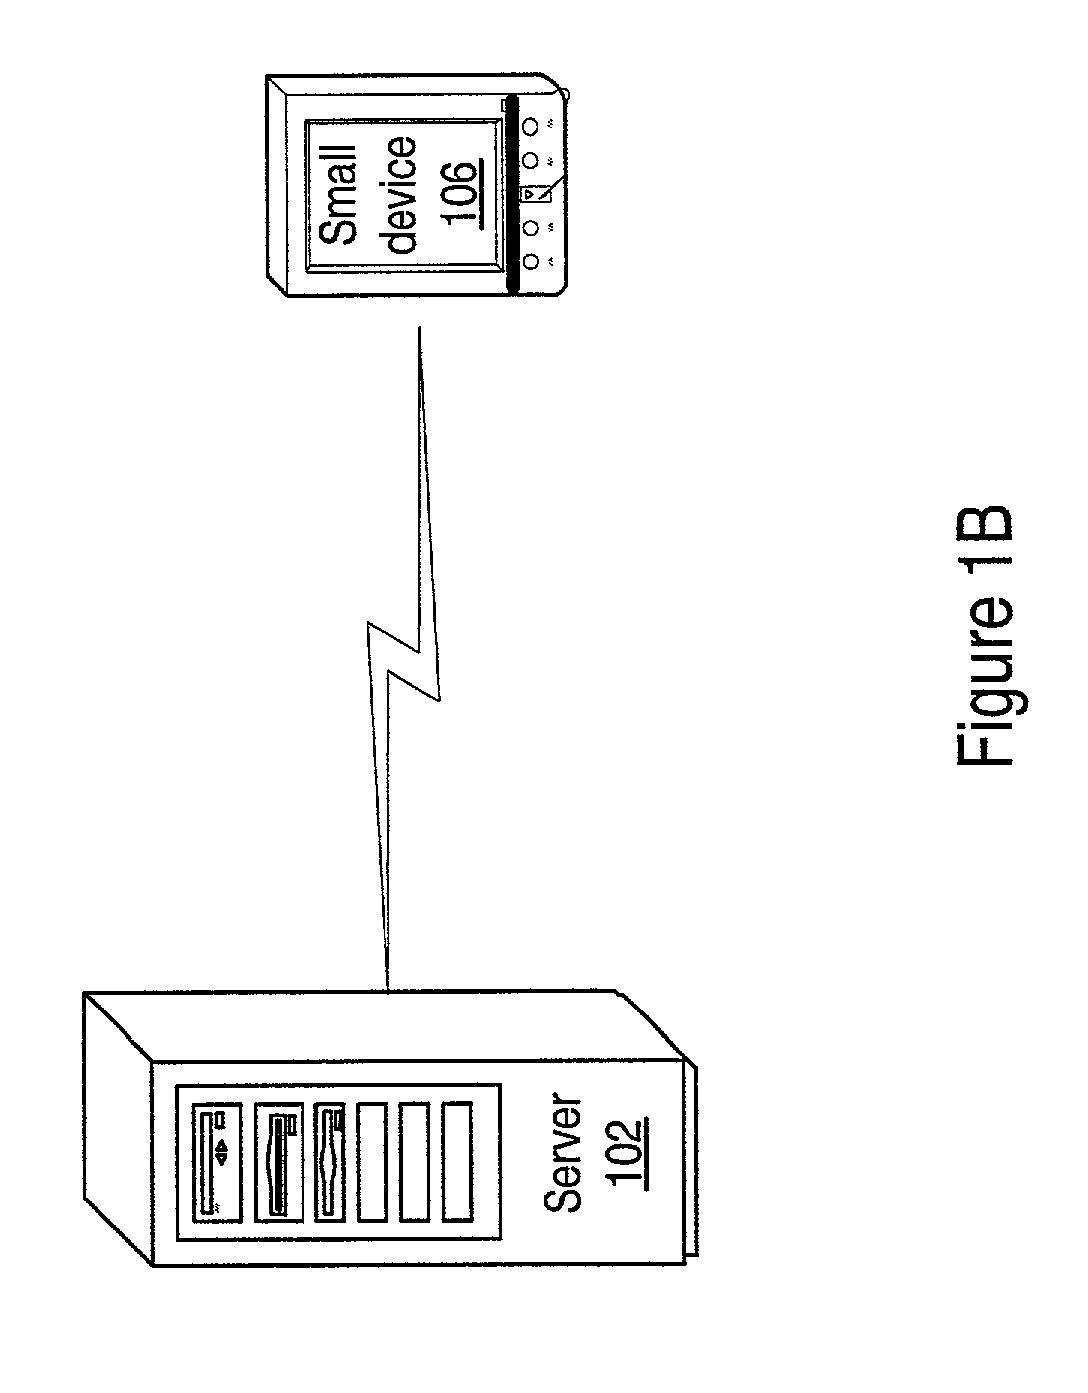 Synchronization of documents between a server and small devices